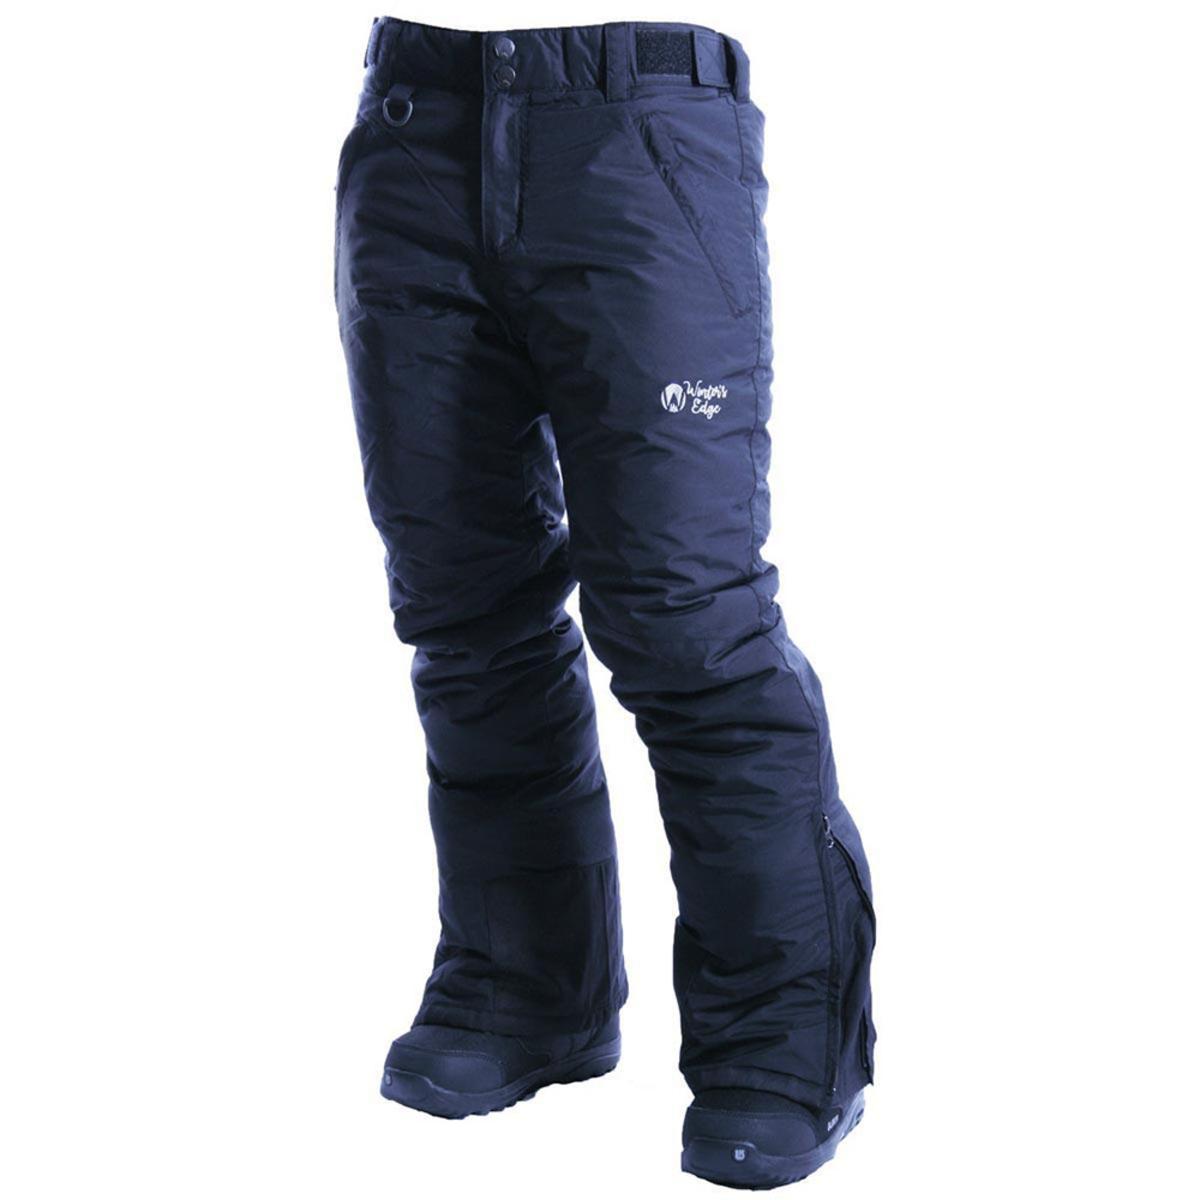 Winter's Edge Women's Avalanche Snow Pants – Adventure Outfitter